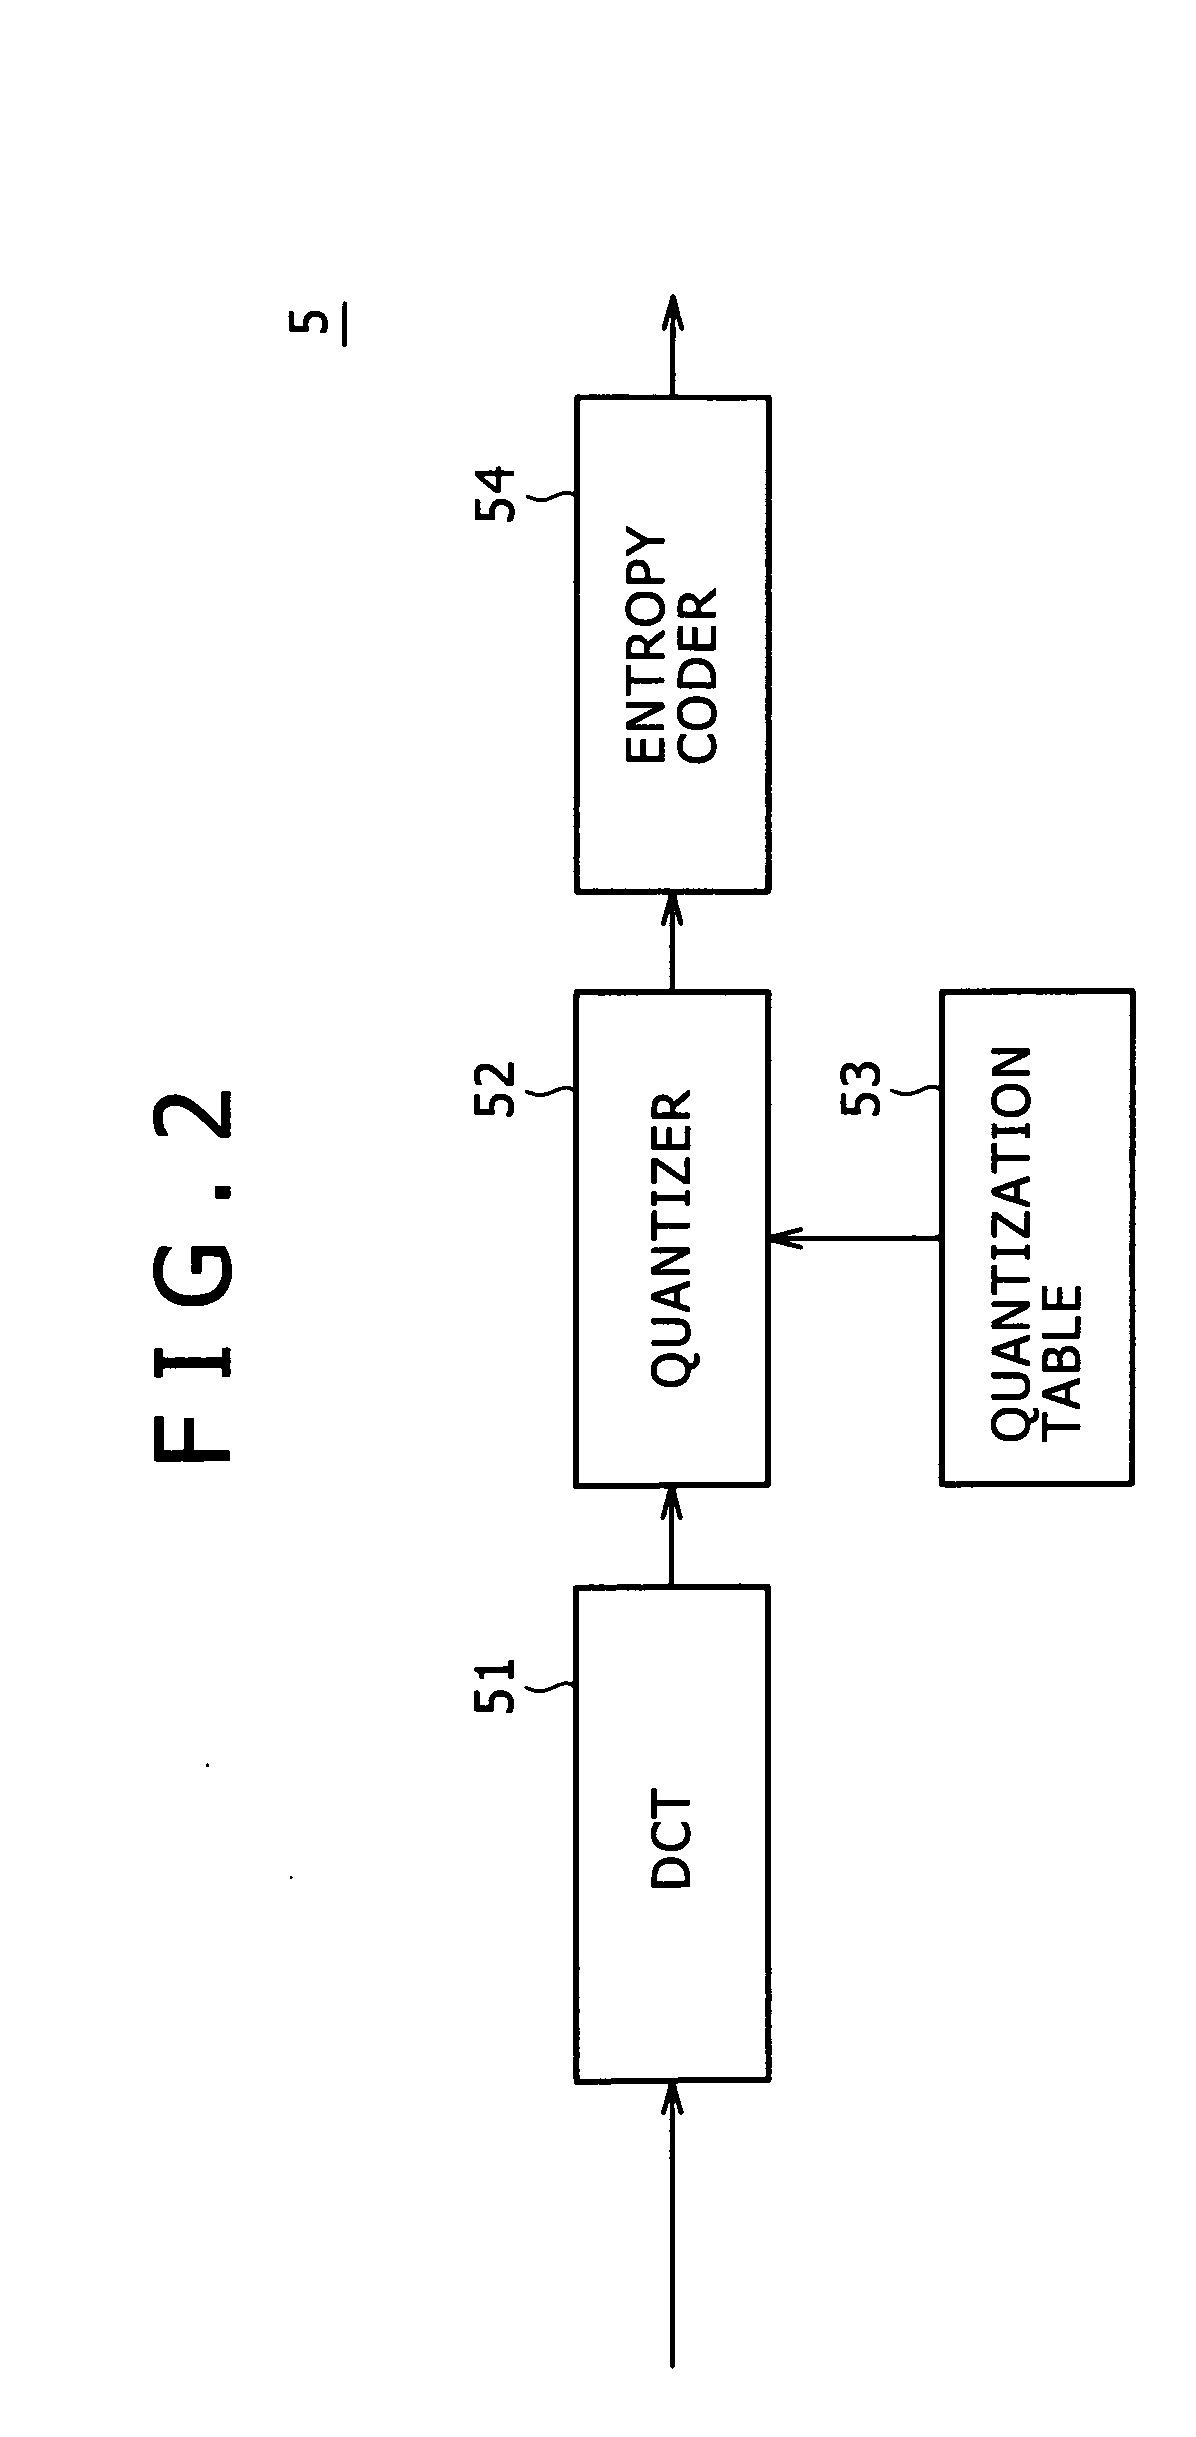 Video signal processing device, video signal processing method and video signal processing program